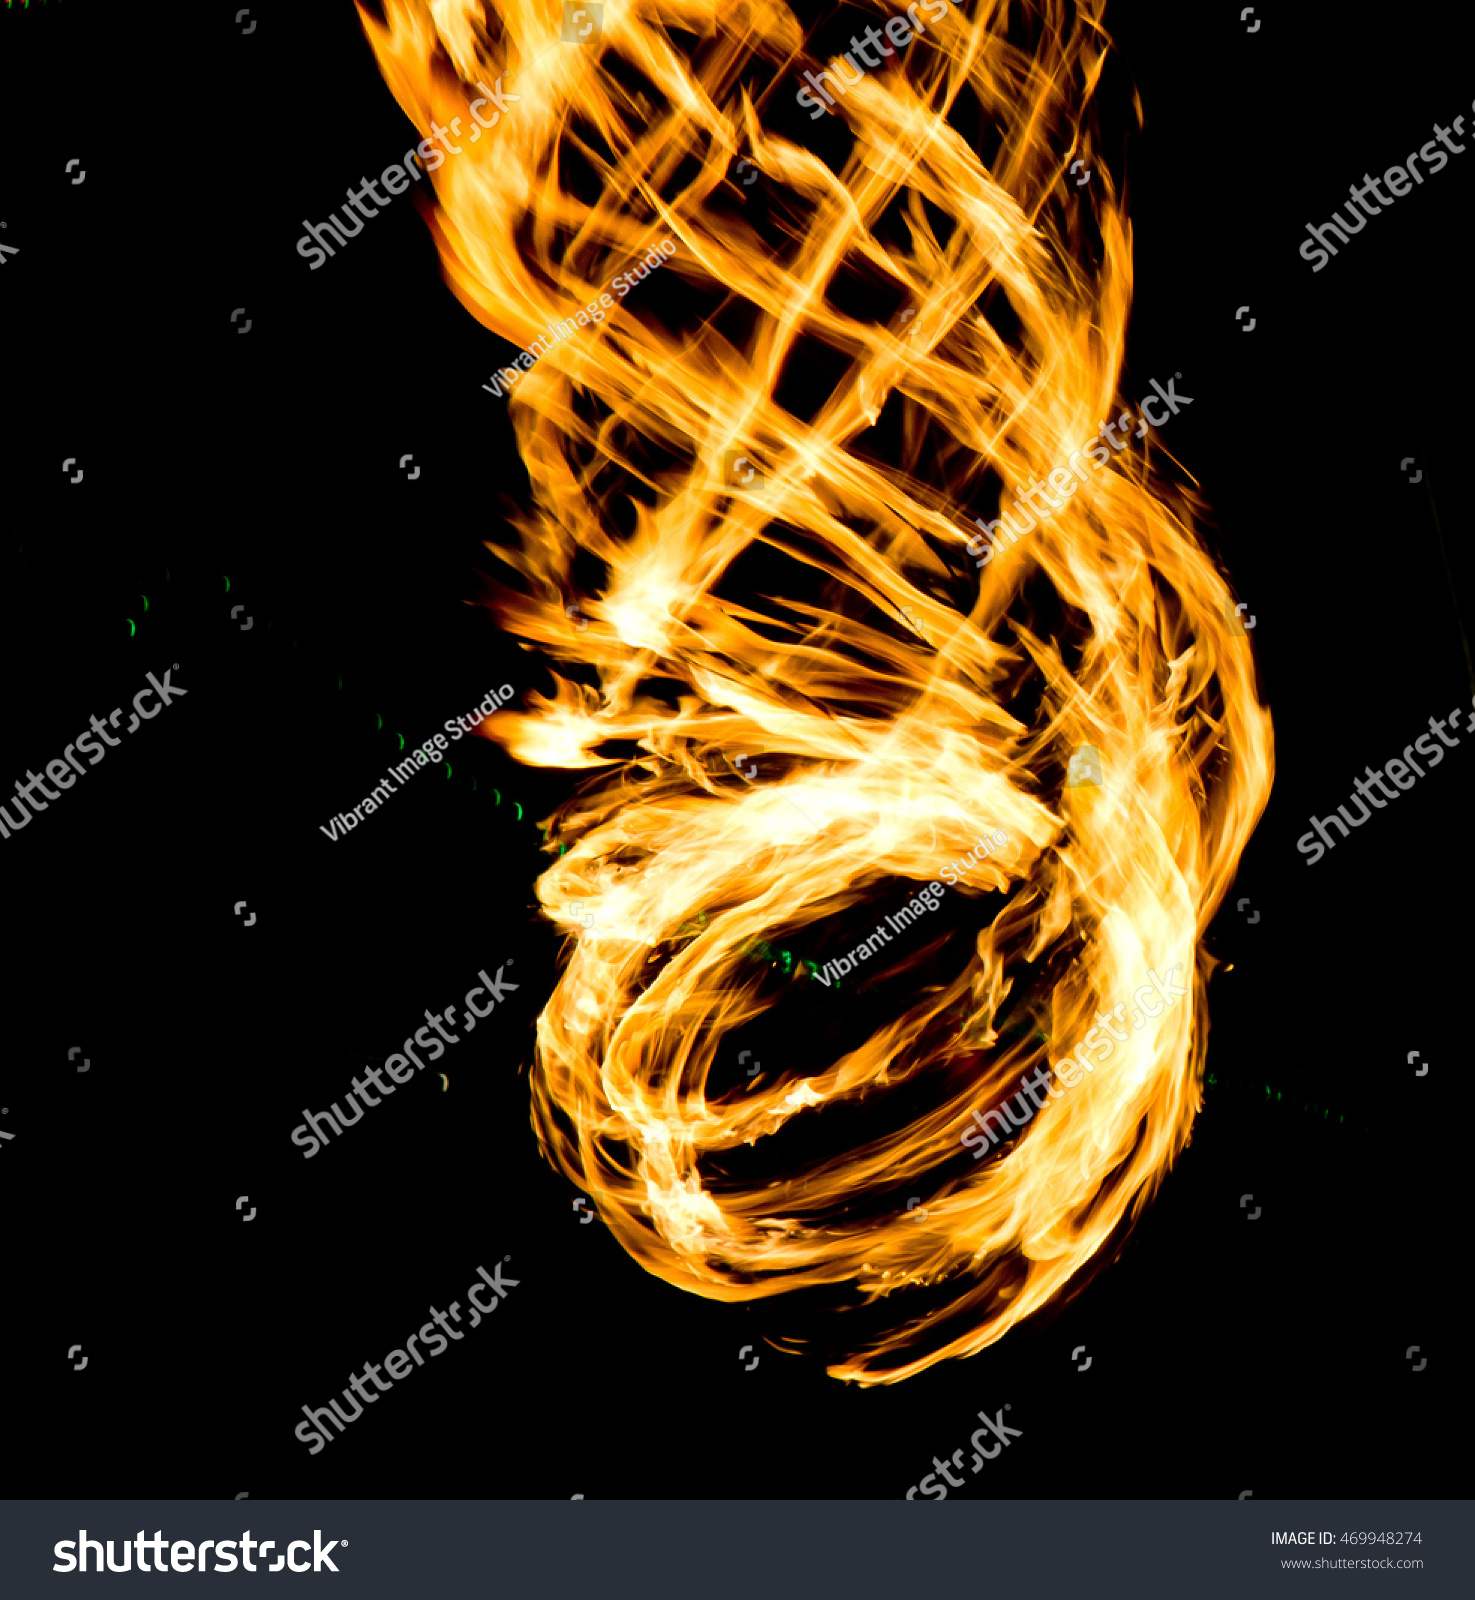 Fire Show Flaming Trails Stock Photo 469948274 - Shutterstock